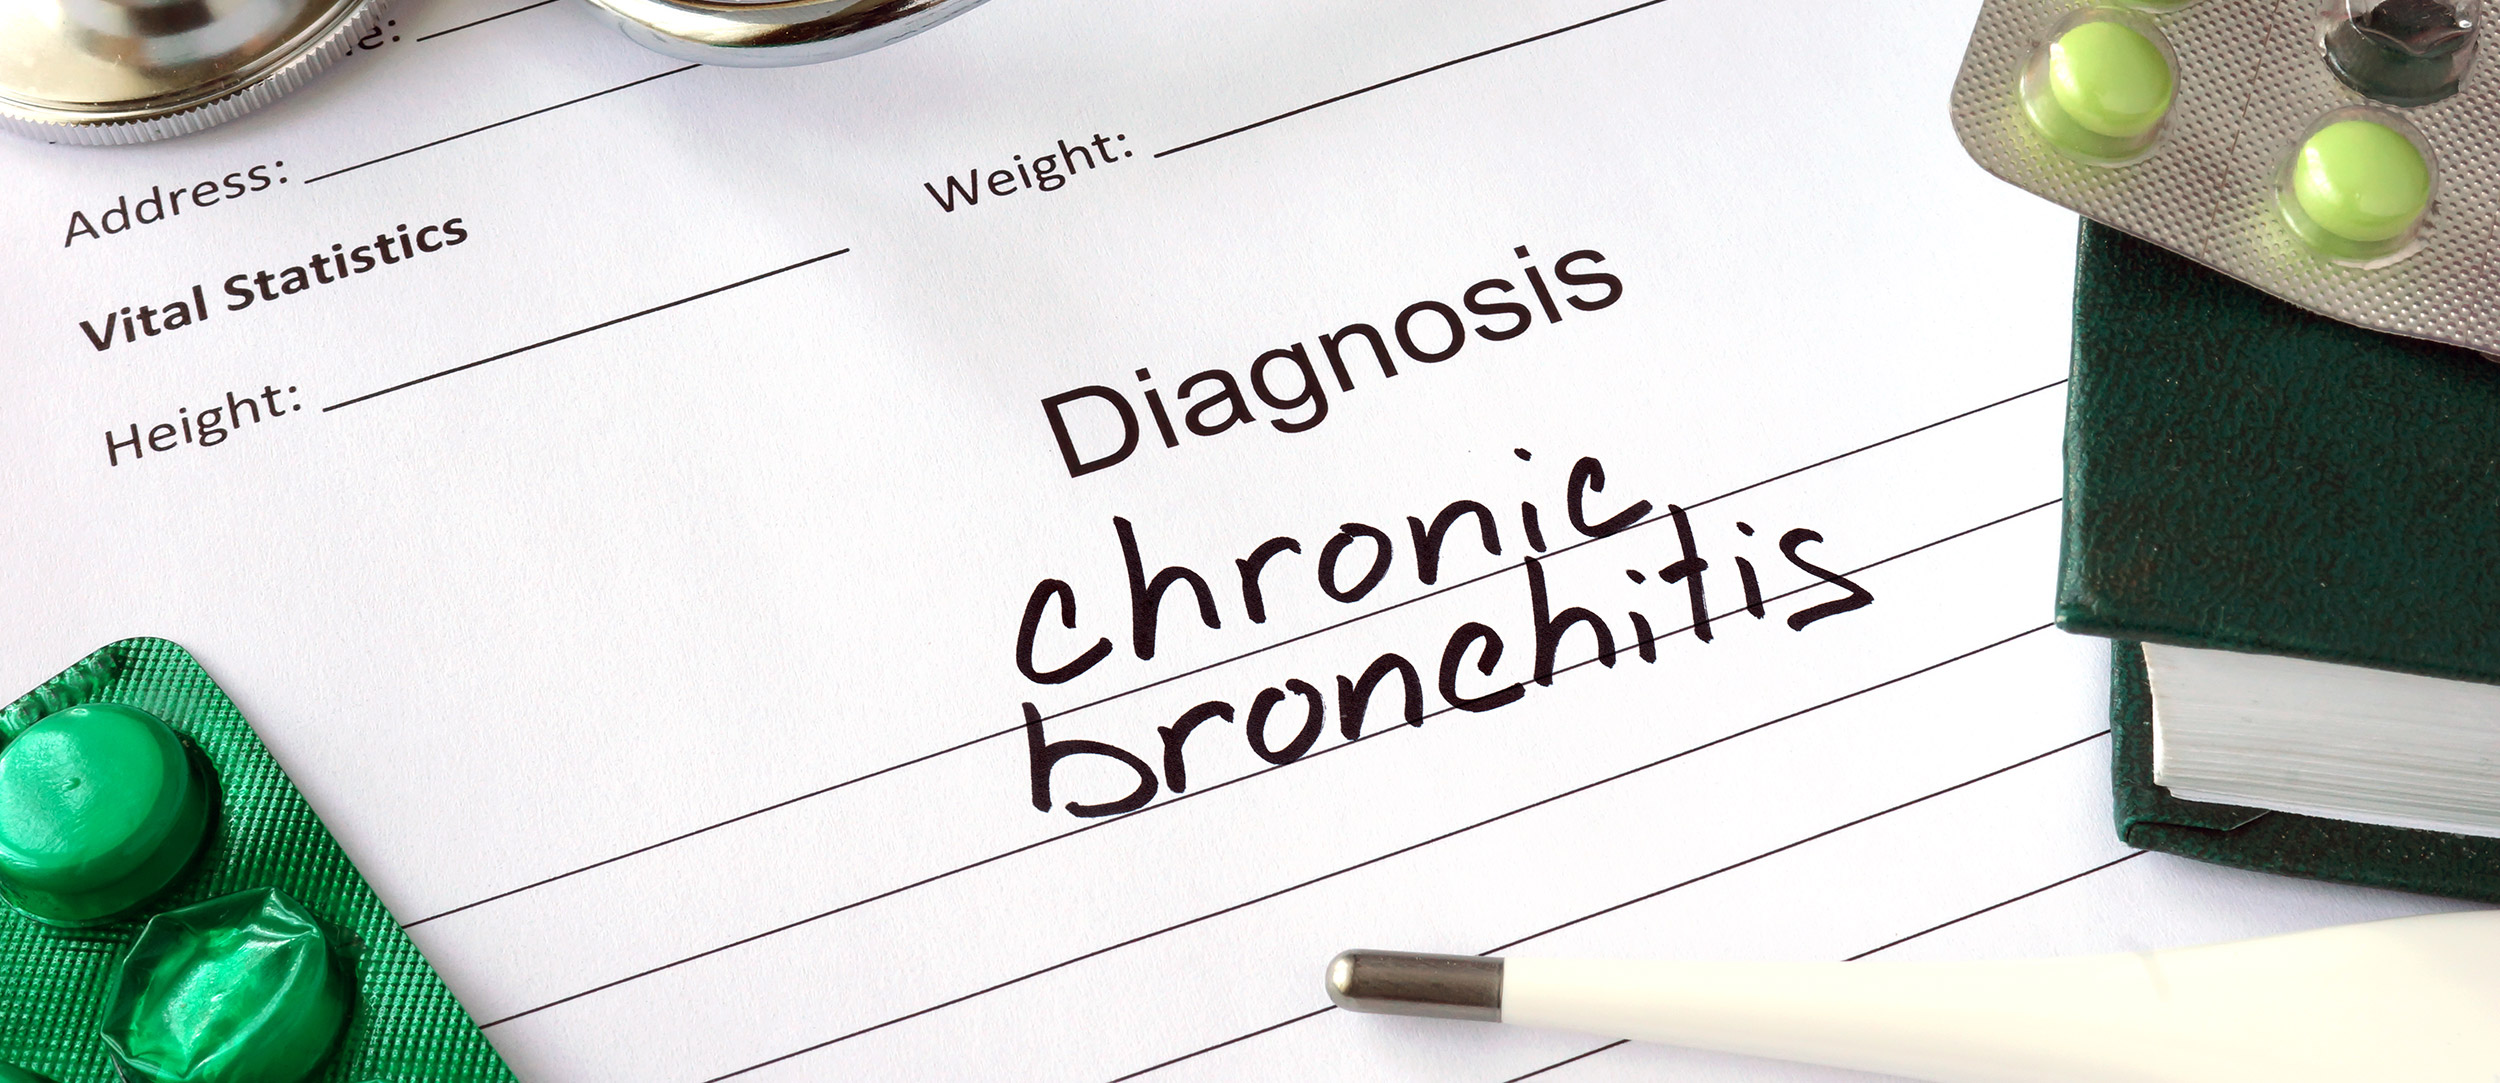 Early intervention using bronchoscopy may play a key role in chronic bronchitis.